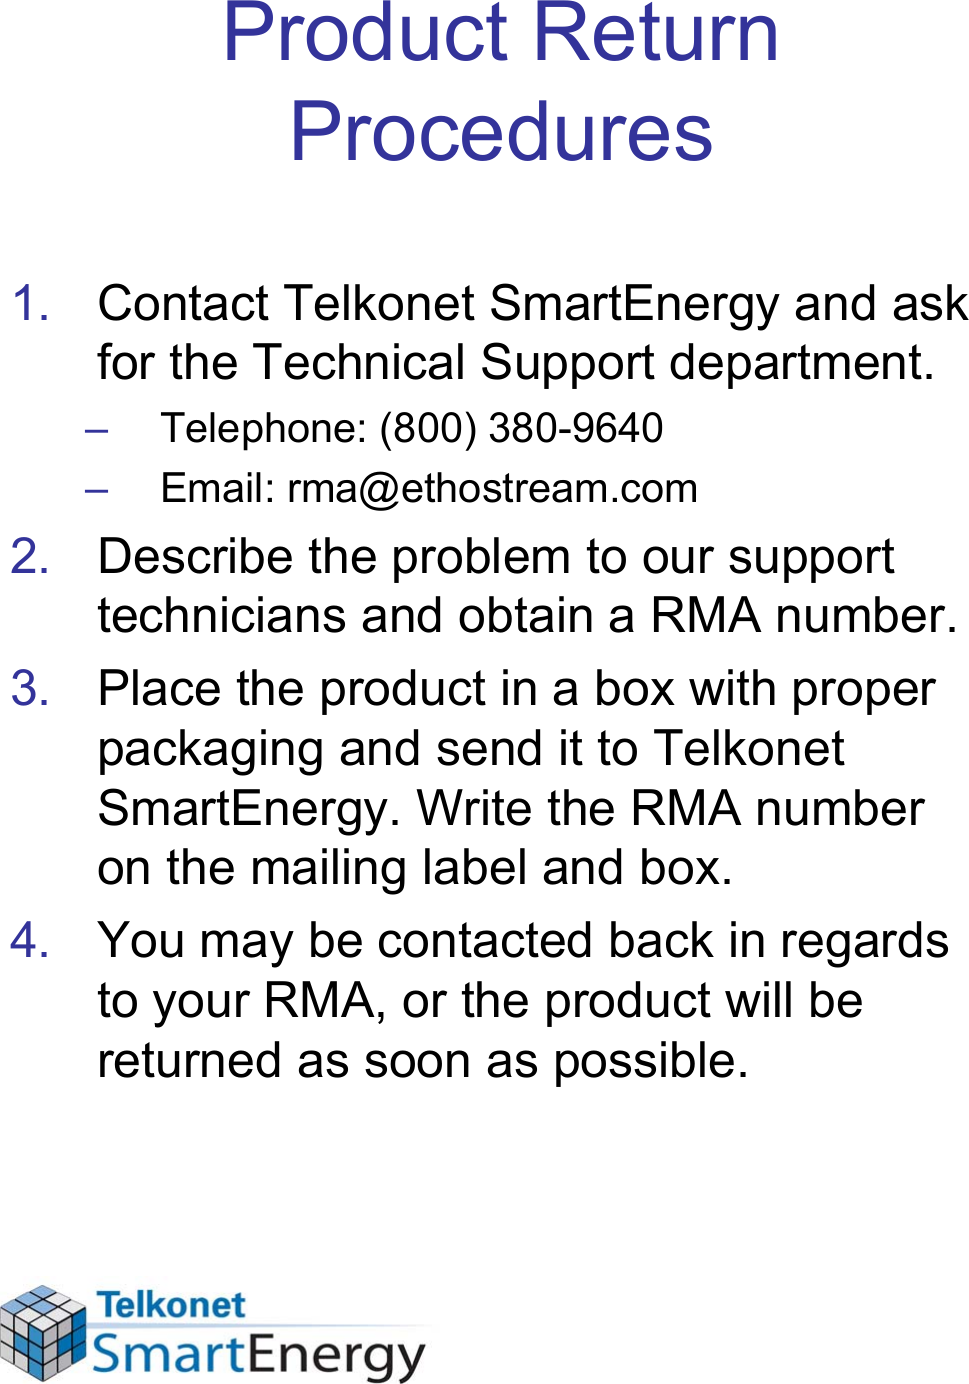 Product Return Procedures1. Contact Telkonet SmartEnergy and ask for the Technical Support department.– Telephone: (800) 380-9640– Email: rma@ethostream.com2. Describe the problem to our support technicians and obtain a RMA number.3. Place the product in a box with proper packaging and send it to Telkonet SmartEnergy. Write the RMA number on the mailing label and box.4. You may be contacted back in regards to your RMA, or the product will be returned as soon as possible.